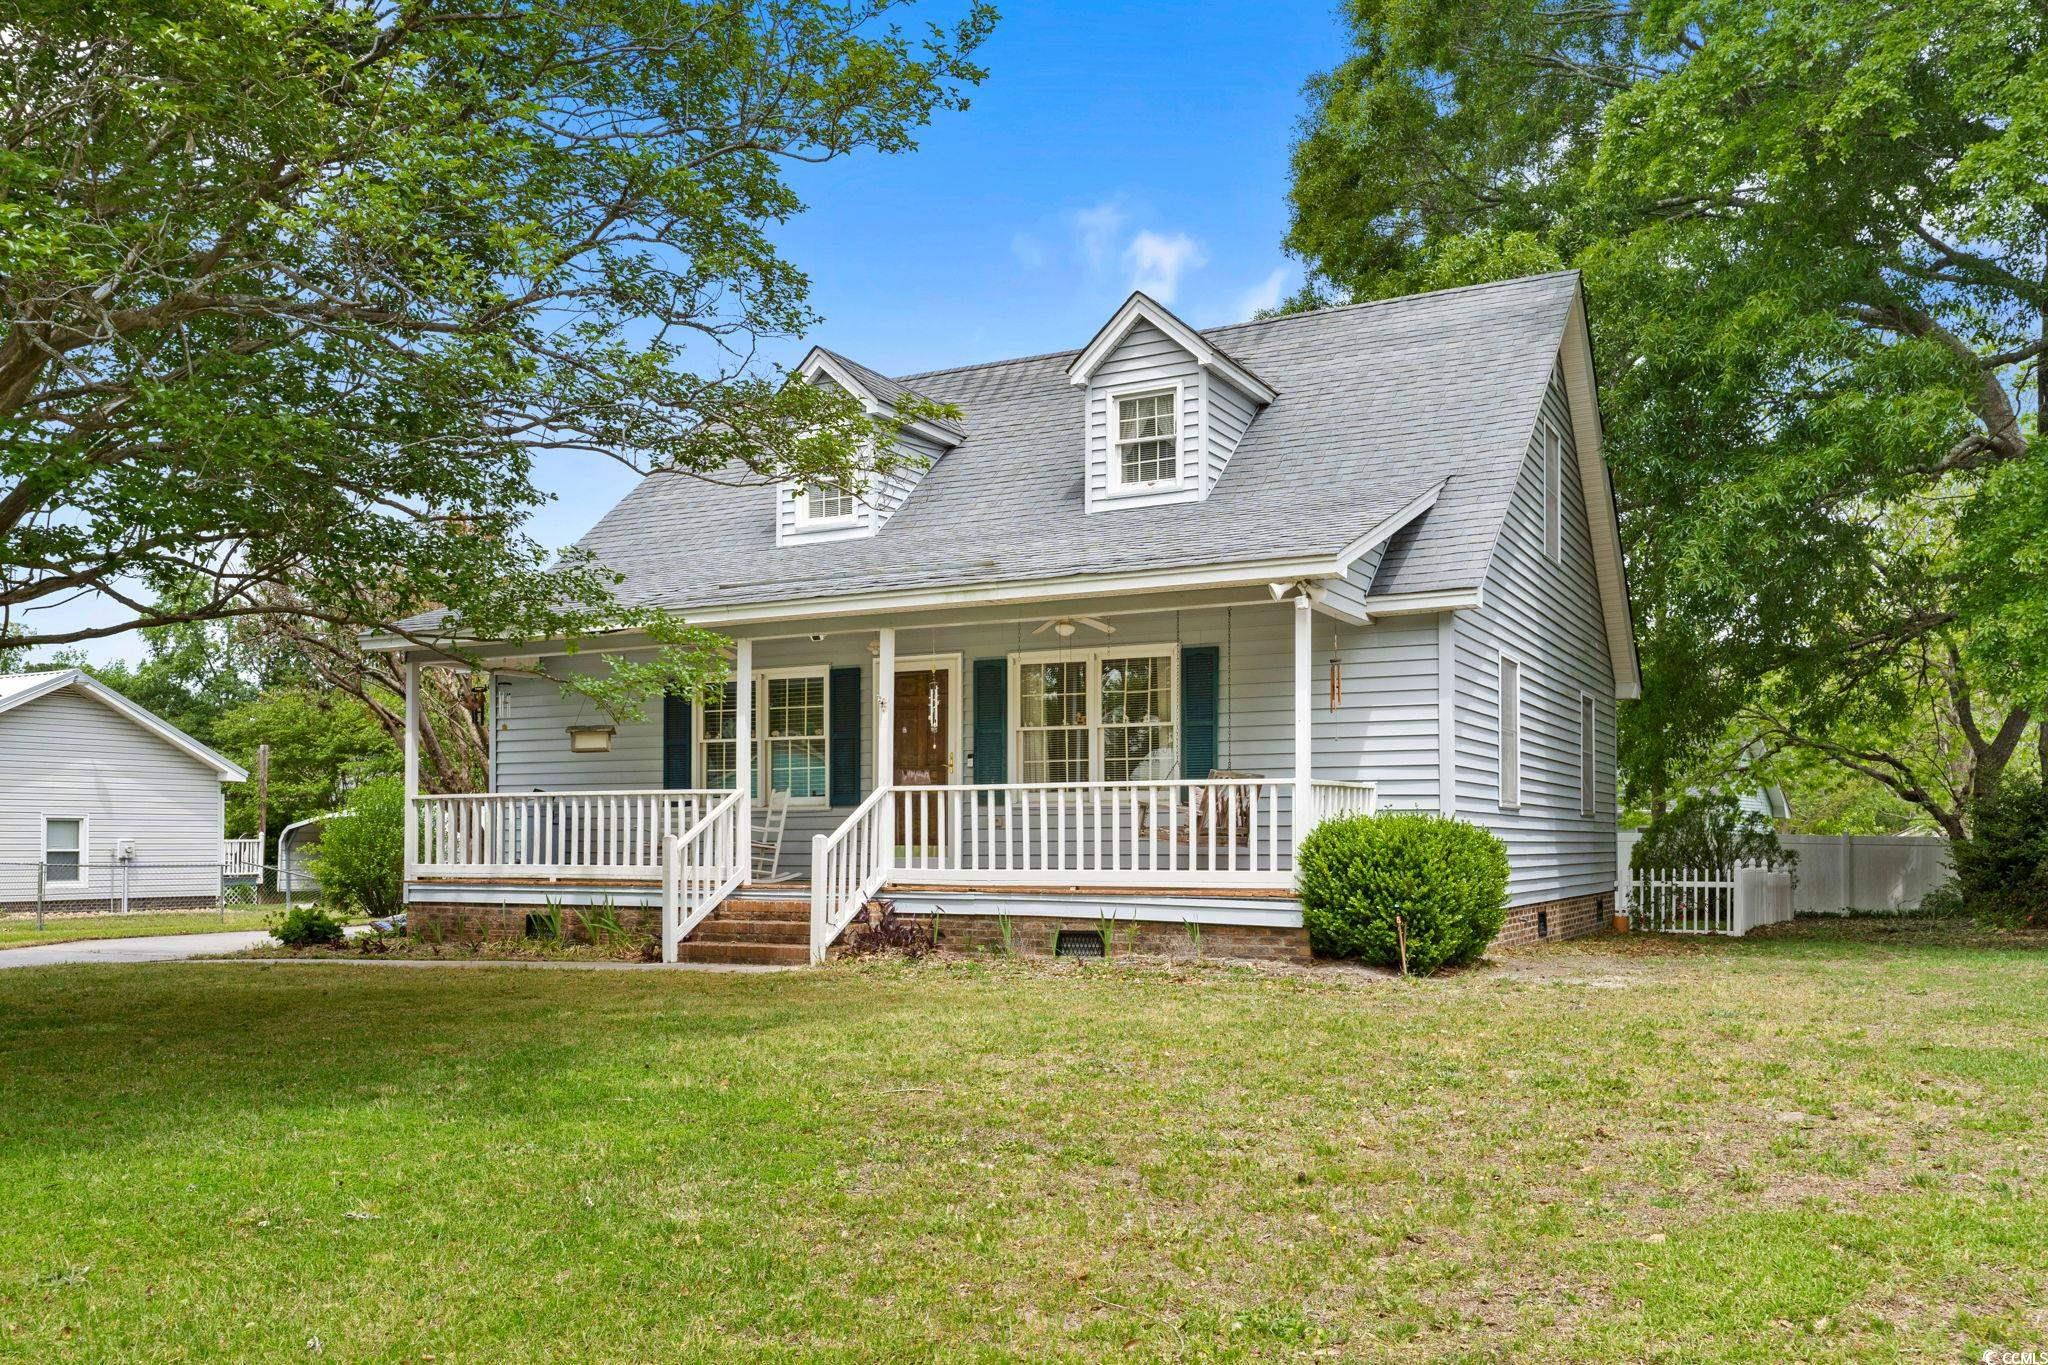 no hoa fees or restrictions in this neighborhood.  this is the perfect 3 bedroom 2 bath home for anyone that wants to park a a boat or rv in their driveway.  this home is a rare one owner home that was custom built in a classic cape cod style with a very charming front porch and dormer windows on the second floor.  you will love the first floor family room, separate living room, eat in kitchen with work island, and first floor master bedroom with nice sized walk in closet.  the second floor has a spacious hallway separating 2 bedrooms and a large sized bathroom. the outdoor space is just divine and includes a spacious rear deck, storage shed and nice white picket fenced yard. call to see this unique home today.